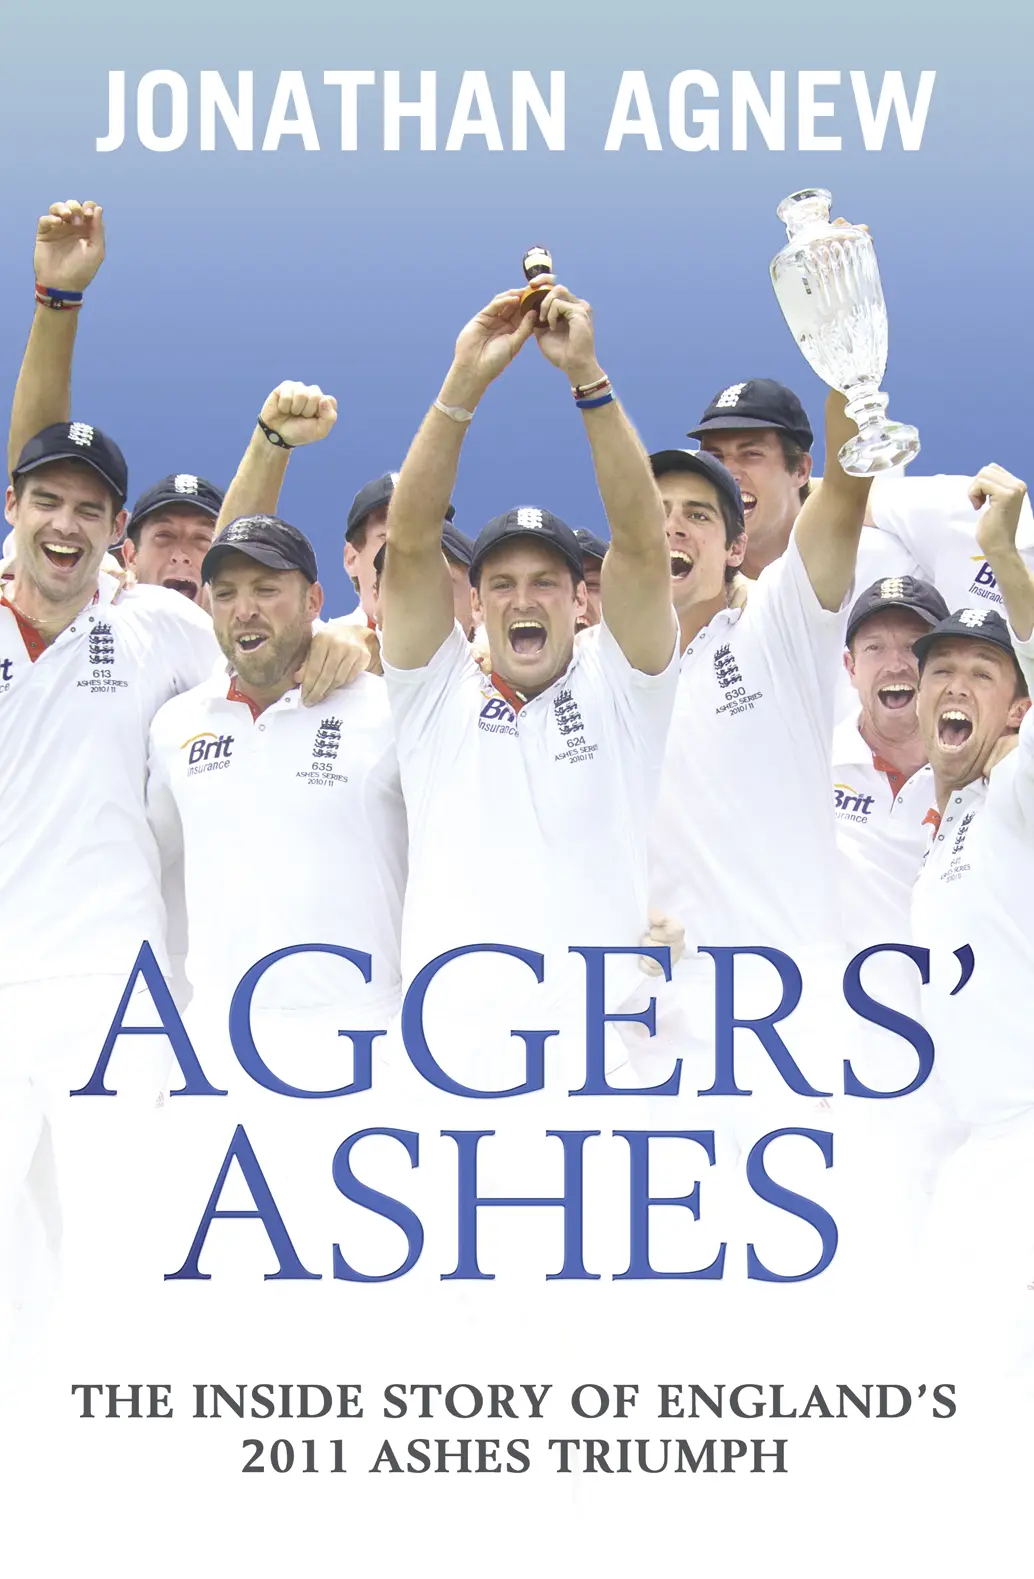 JONATHAN AGNEW AGGERS ASHES The Inside Story of Englands 2011 Ashes Triumph - фото 1